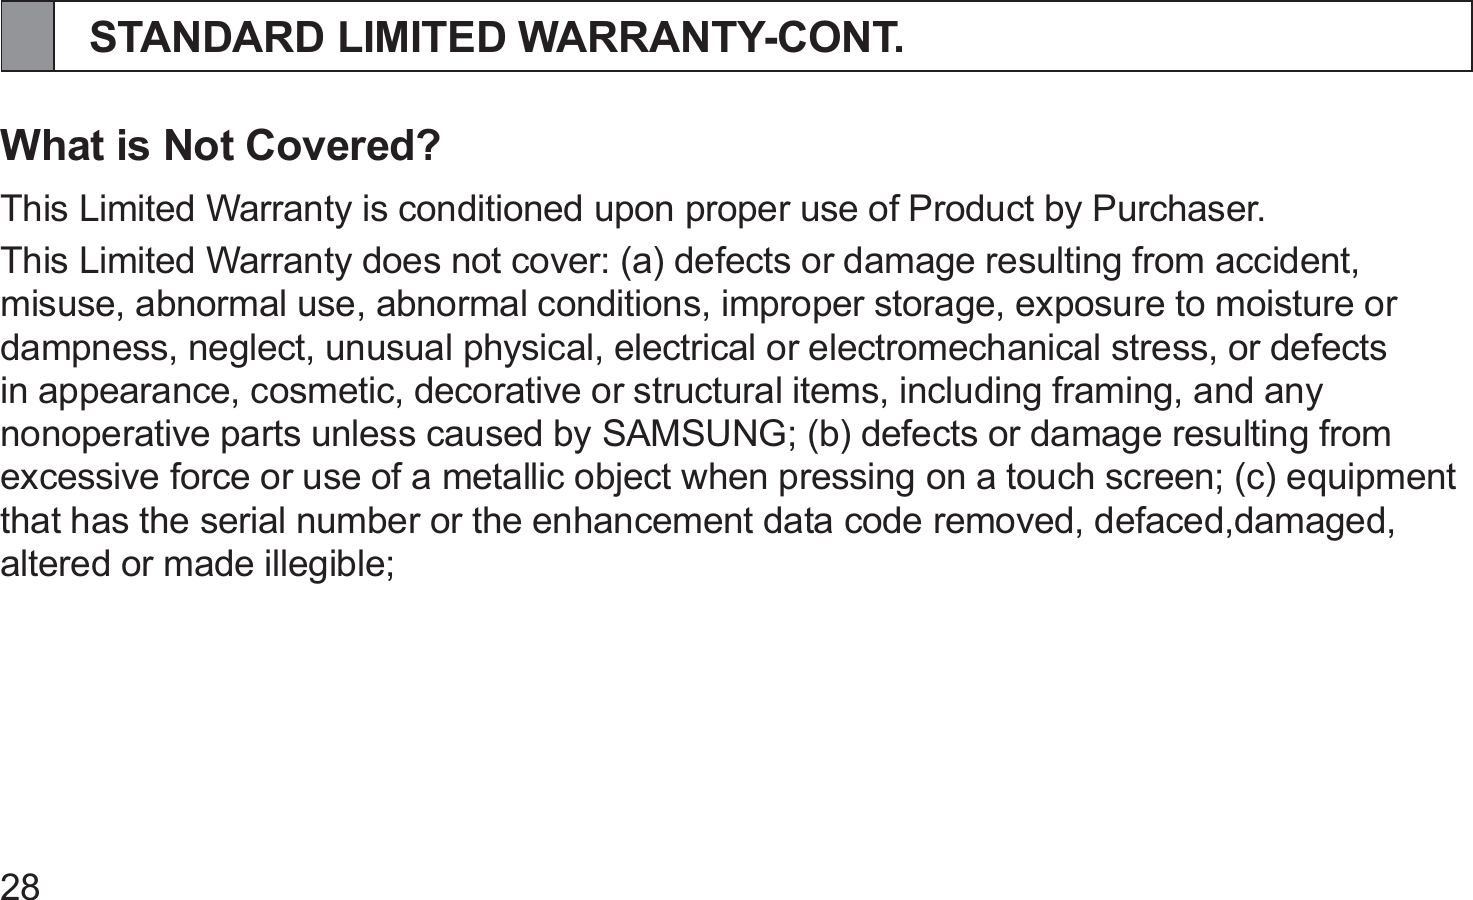 28STANDARD LIMITED WARRANTY-CONT.What is Not Covered?This Limited Warranty is conditioned upon proper use of Product by Purchaser.This Limited Warranty does not cover: (a) defects or damage resulting from accident, misuse, abnormal use, abnormal conditions, improper storage, exposure to moisture or dampness, neglect, unusual physical, electrical or electromechanical stress, or defects in appearance, cosmetic, decorative or structural items, including framing, and any nonoperative parts unless caused by SAMSUNG; (b) defects or damage resulting from excessive force or use of a metallic object when pressing on a touch screen; (c) equipment that has the serial number or the enhancement data code removed, defaced,damaged, altered or made illegible;